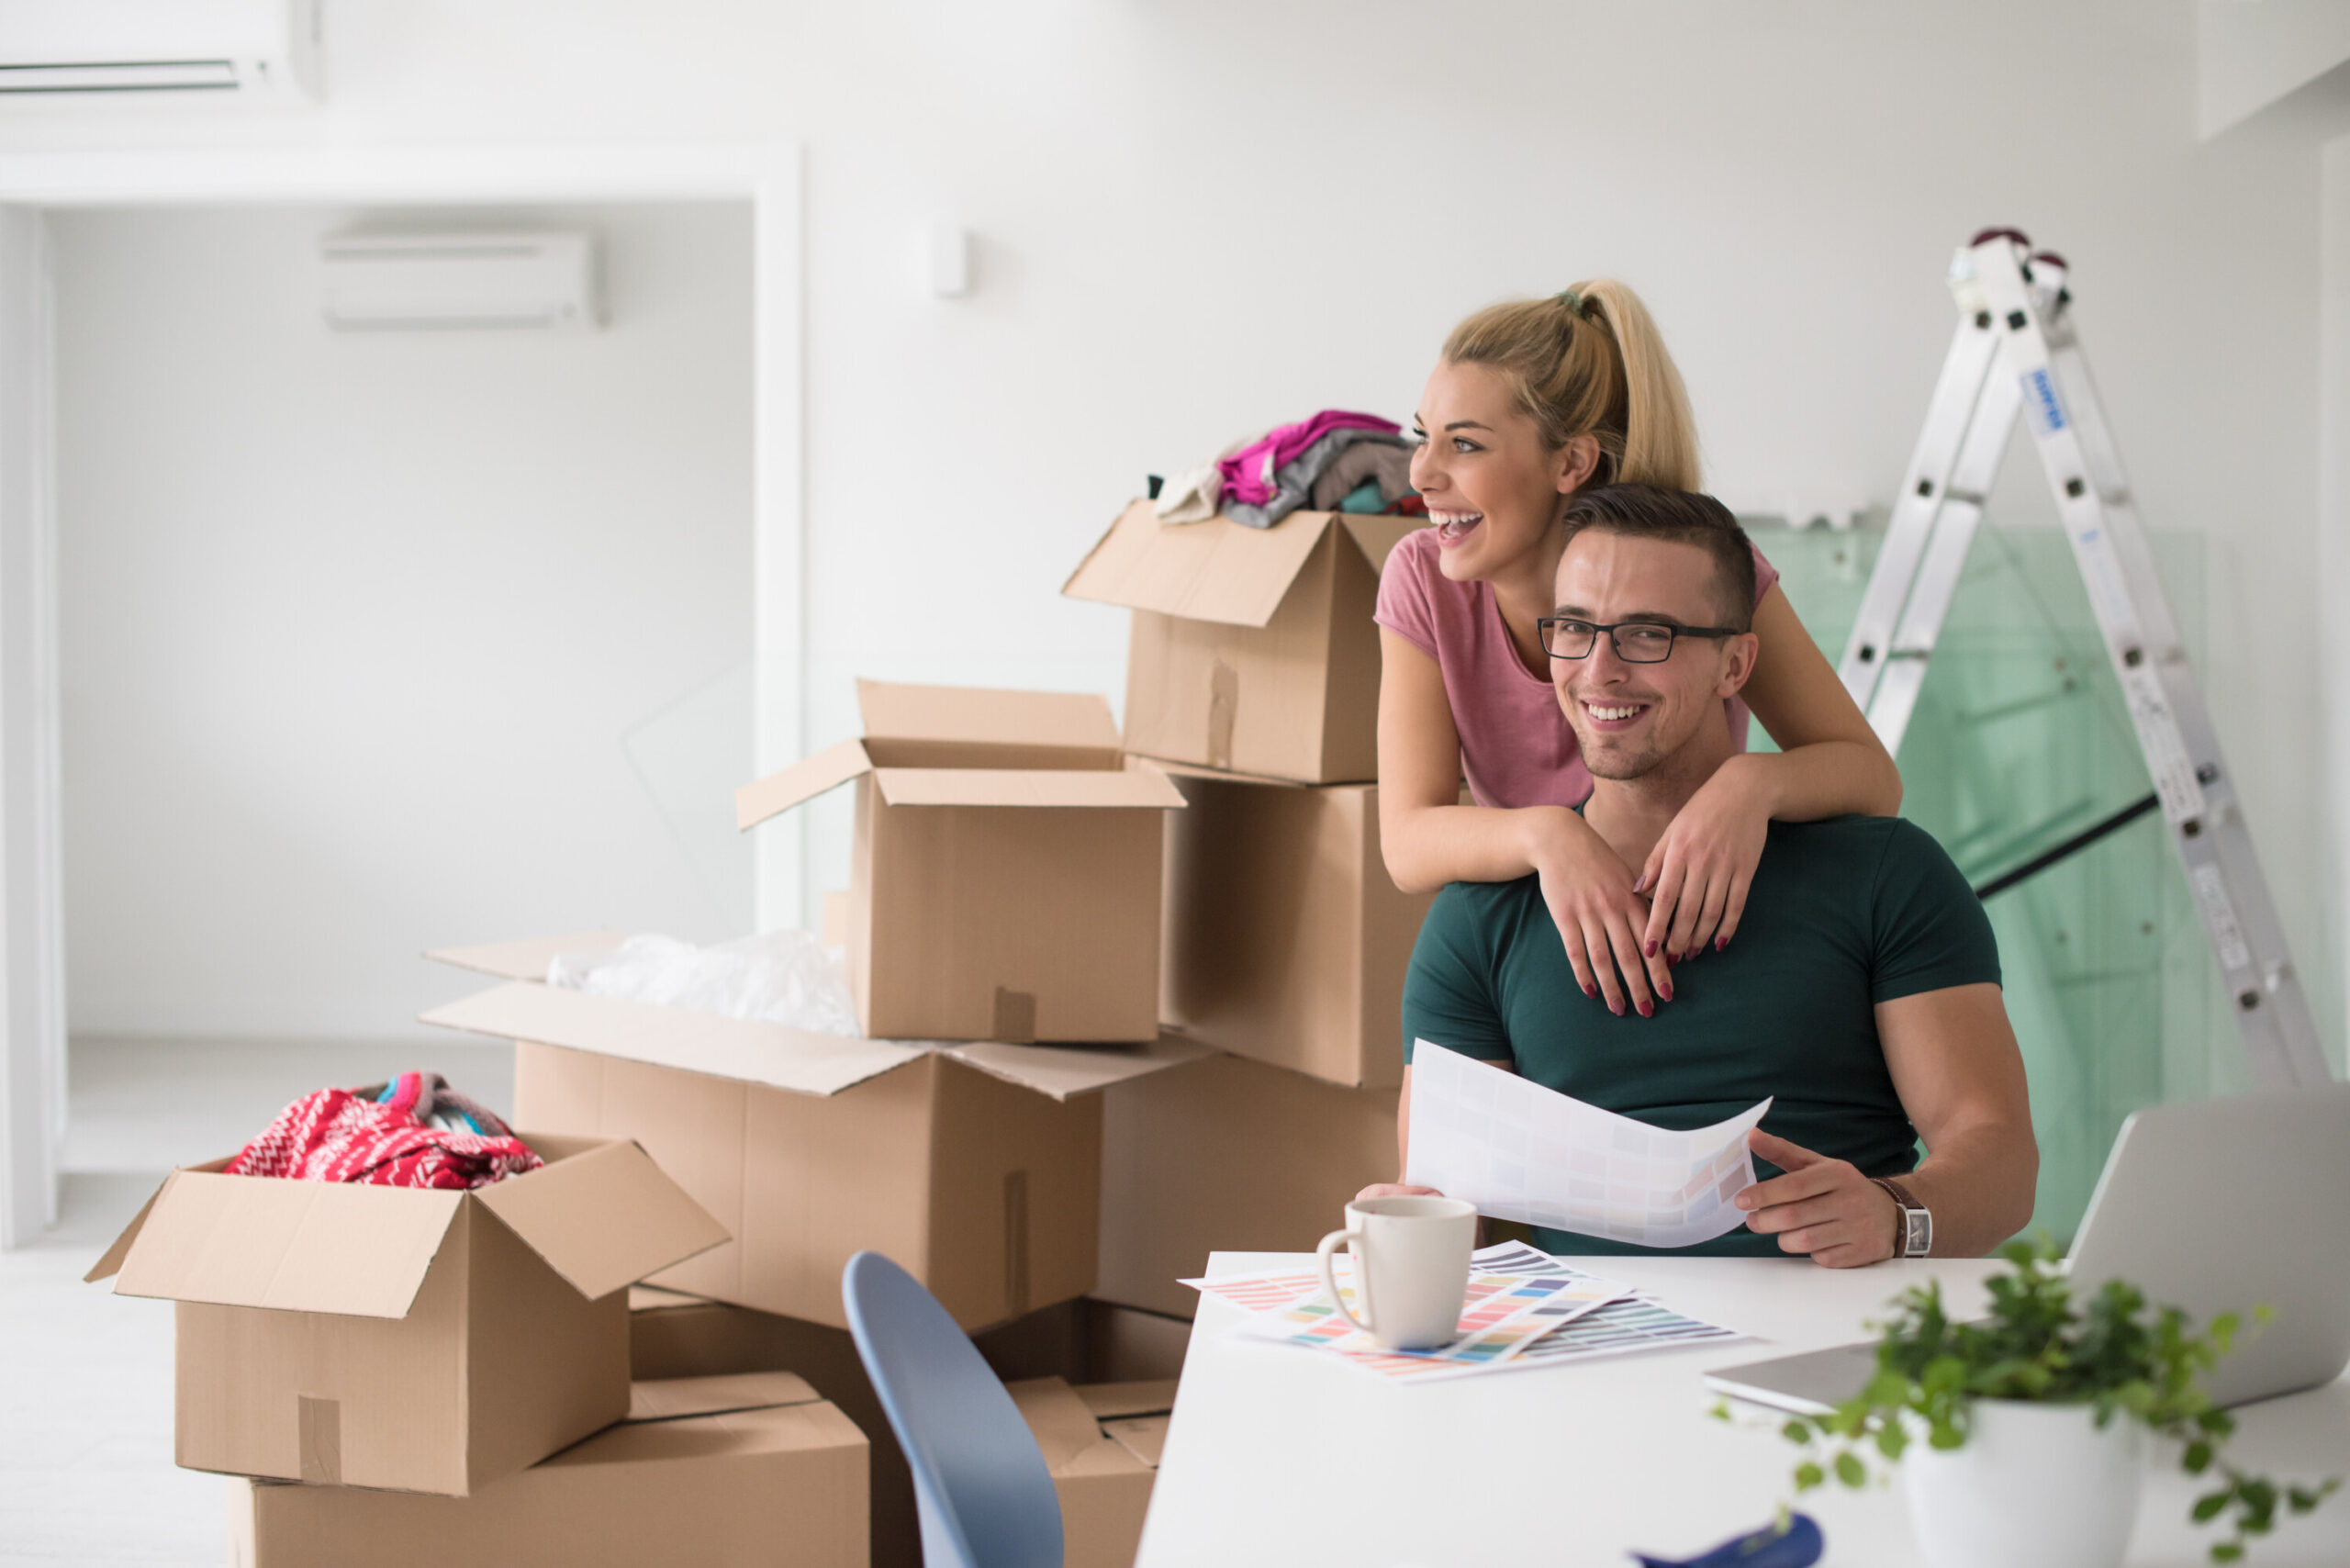 Couple with moving boxes in the background looking at papers while planning move.